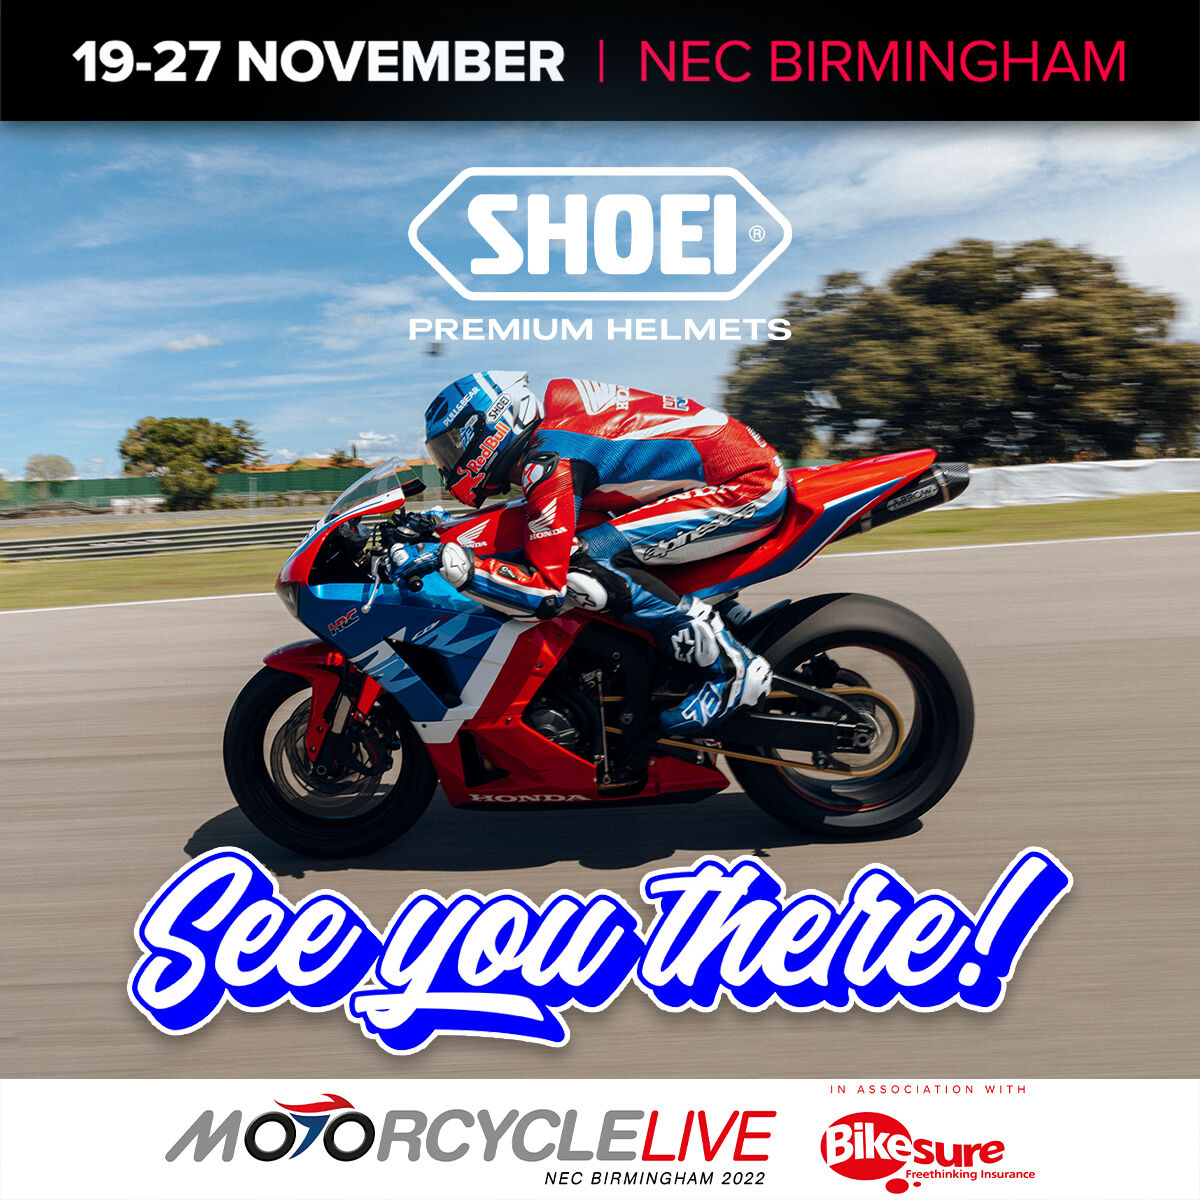 We are exhibiting at @motorcyclelive at the NEC Birmingham starting this Saturday until the 27th November, find us in Hall 3. #Shoei #ShoeiHelmet #ShoeiXSPRpro #XSPRpro #Motorcycle #MotorcycleHelmet #motorcyclelive #nec #motorcycle #motorbike #motorcycleshow #bikeshow